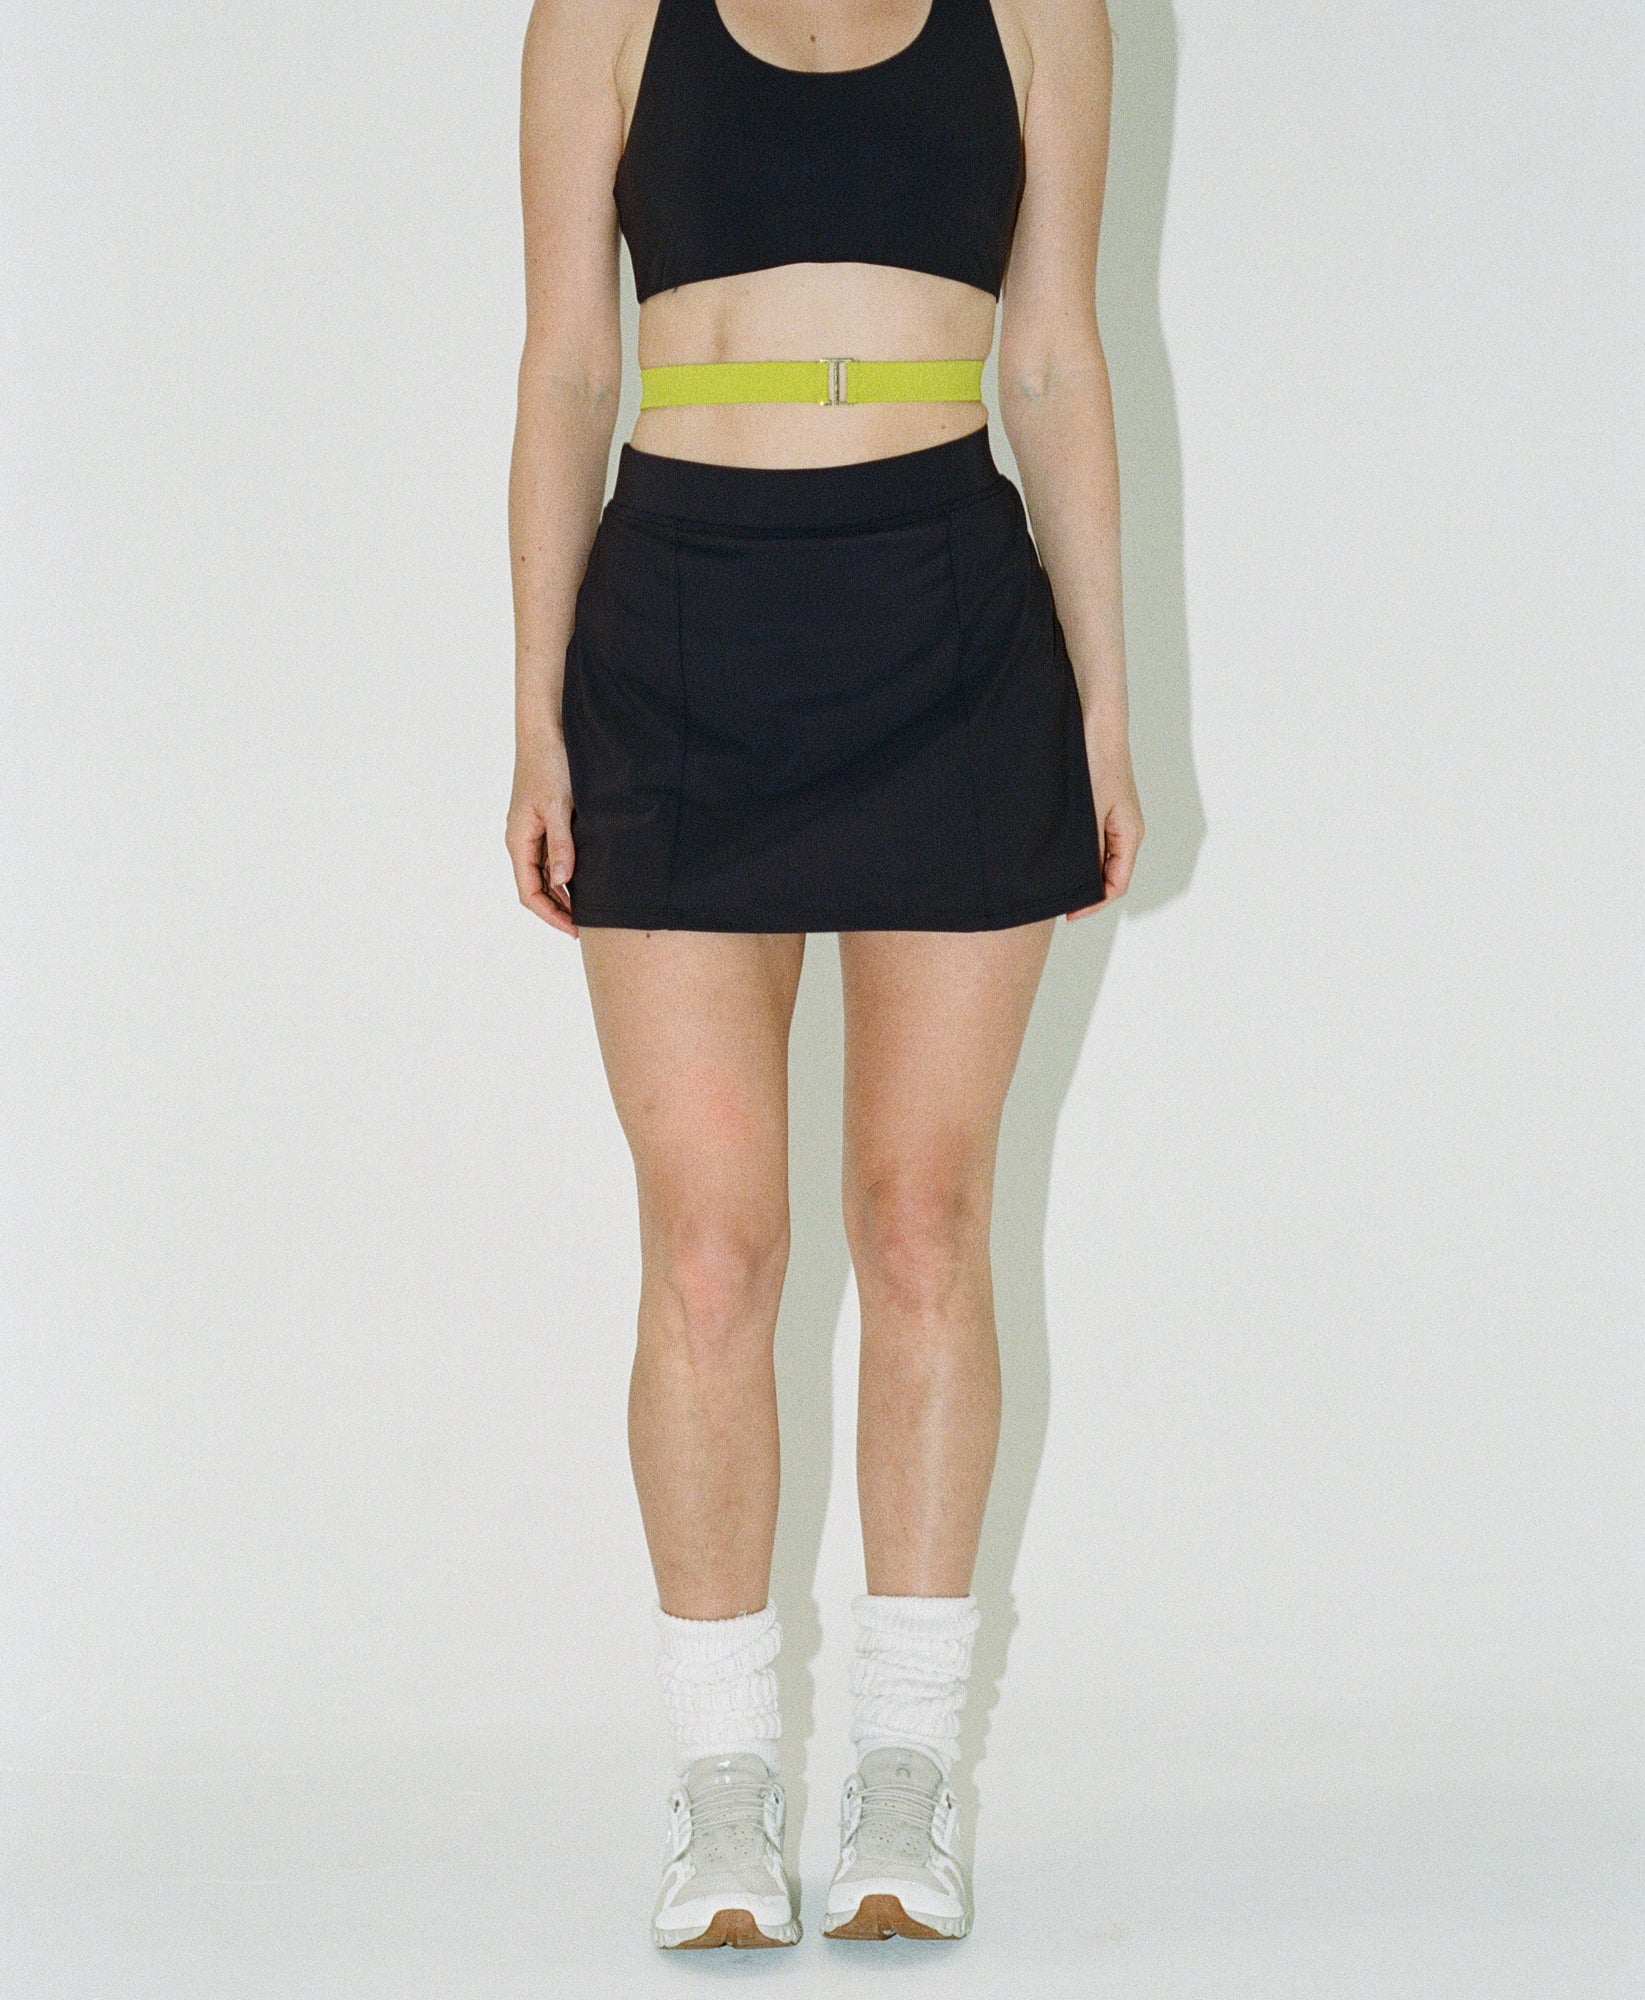 Wear One's At Simple Skort in Au Natural on Model Front View